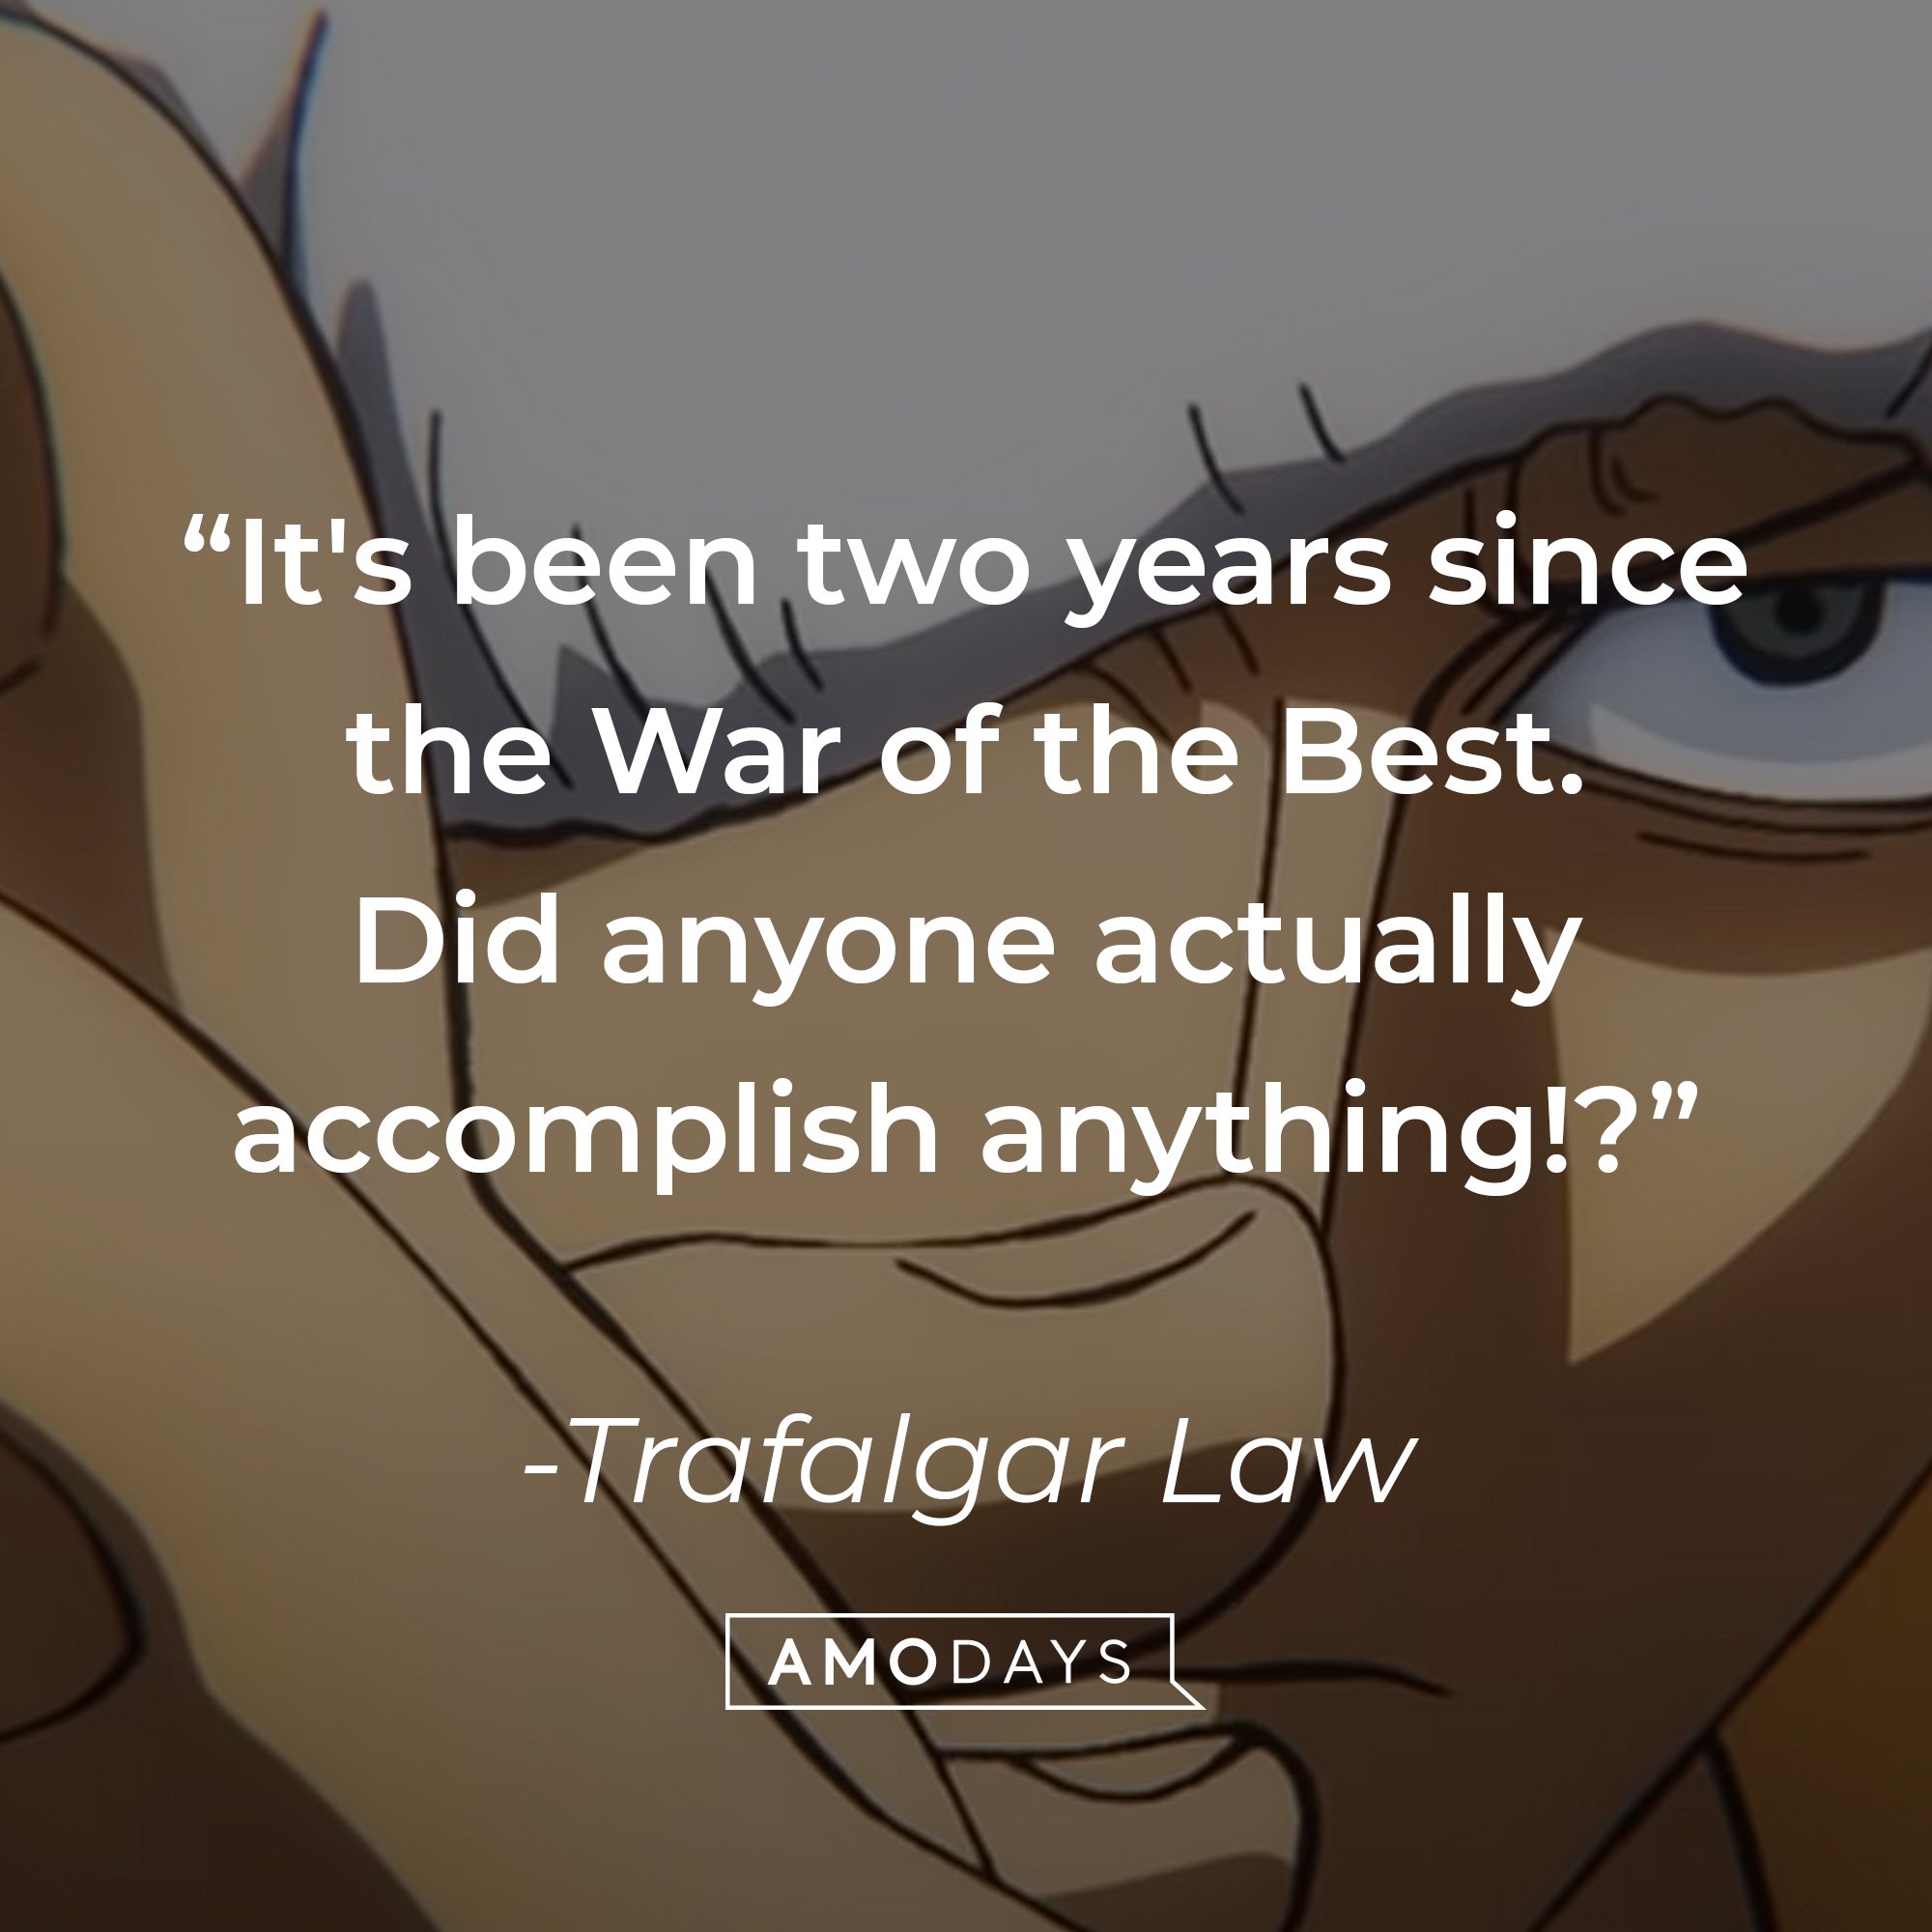 Trafalgar Law’s quote: “It's been two years since the War of the Best. Did anyone actually accomplish anything!?” | Image: AmoDays